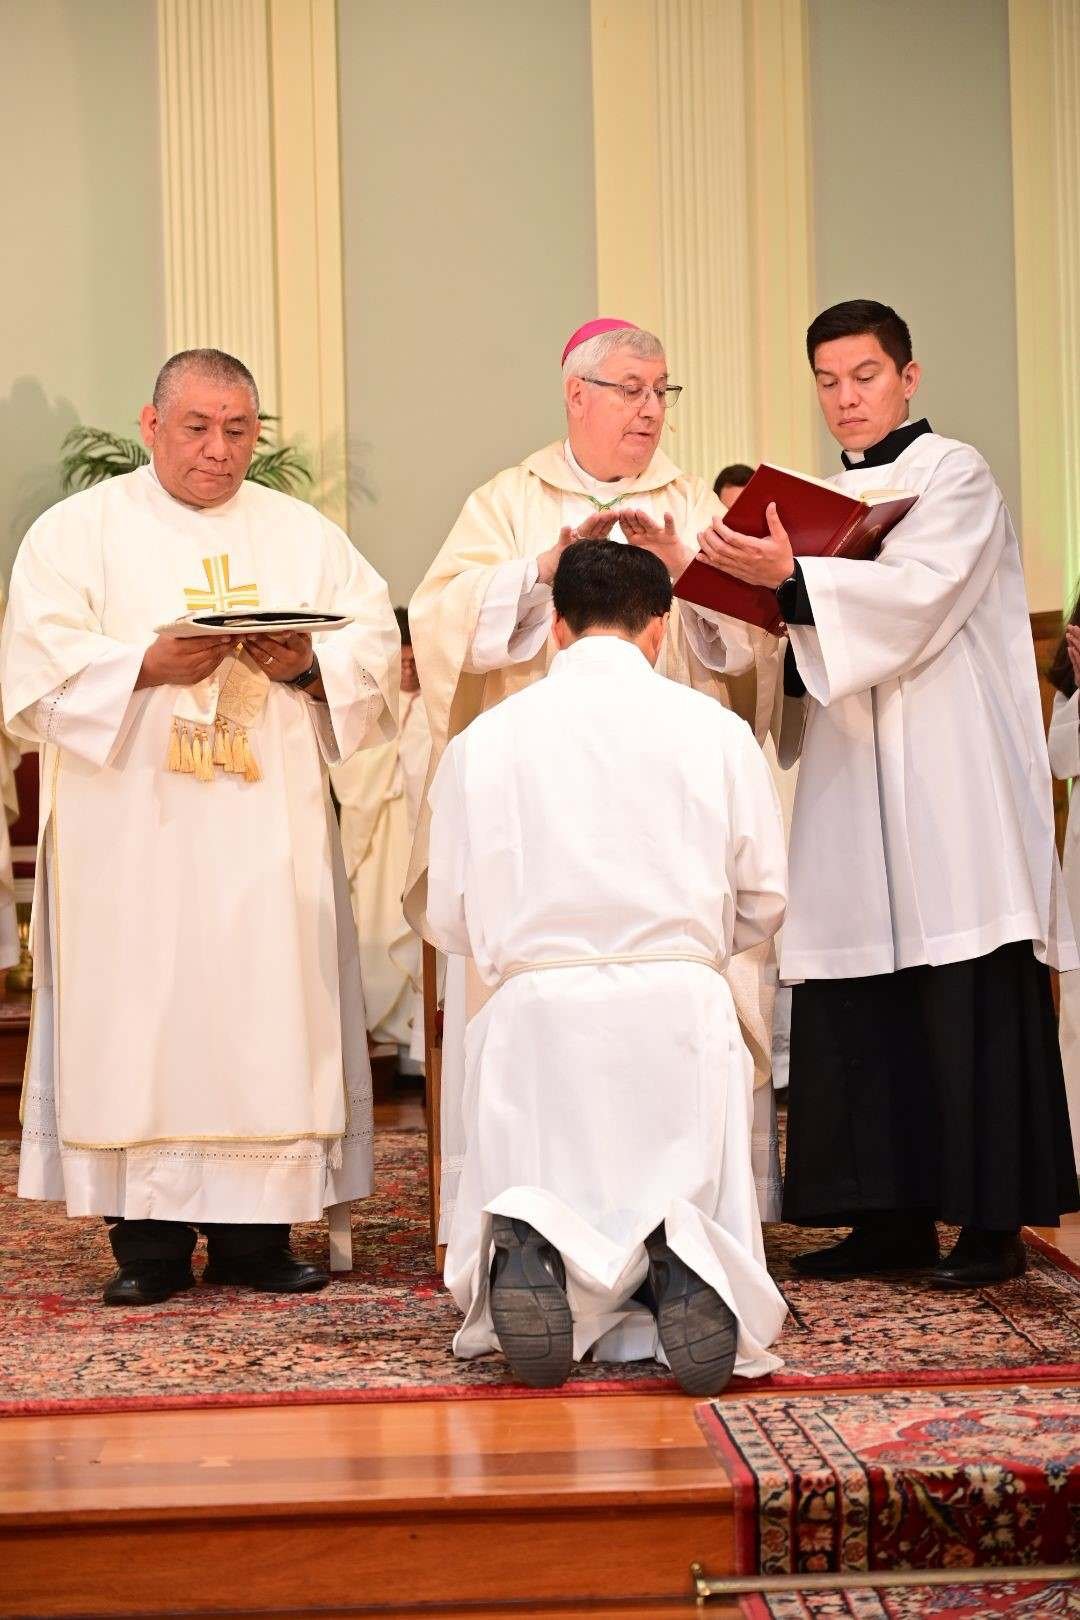 Diaconal Ordination of First Idente Missionary from Korea